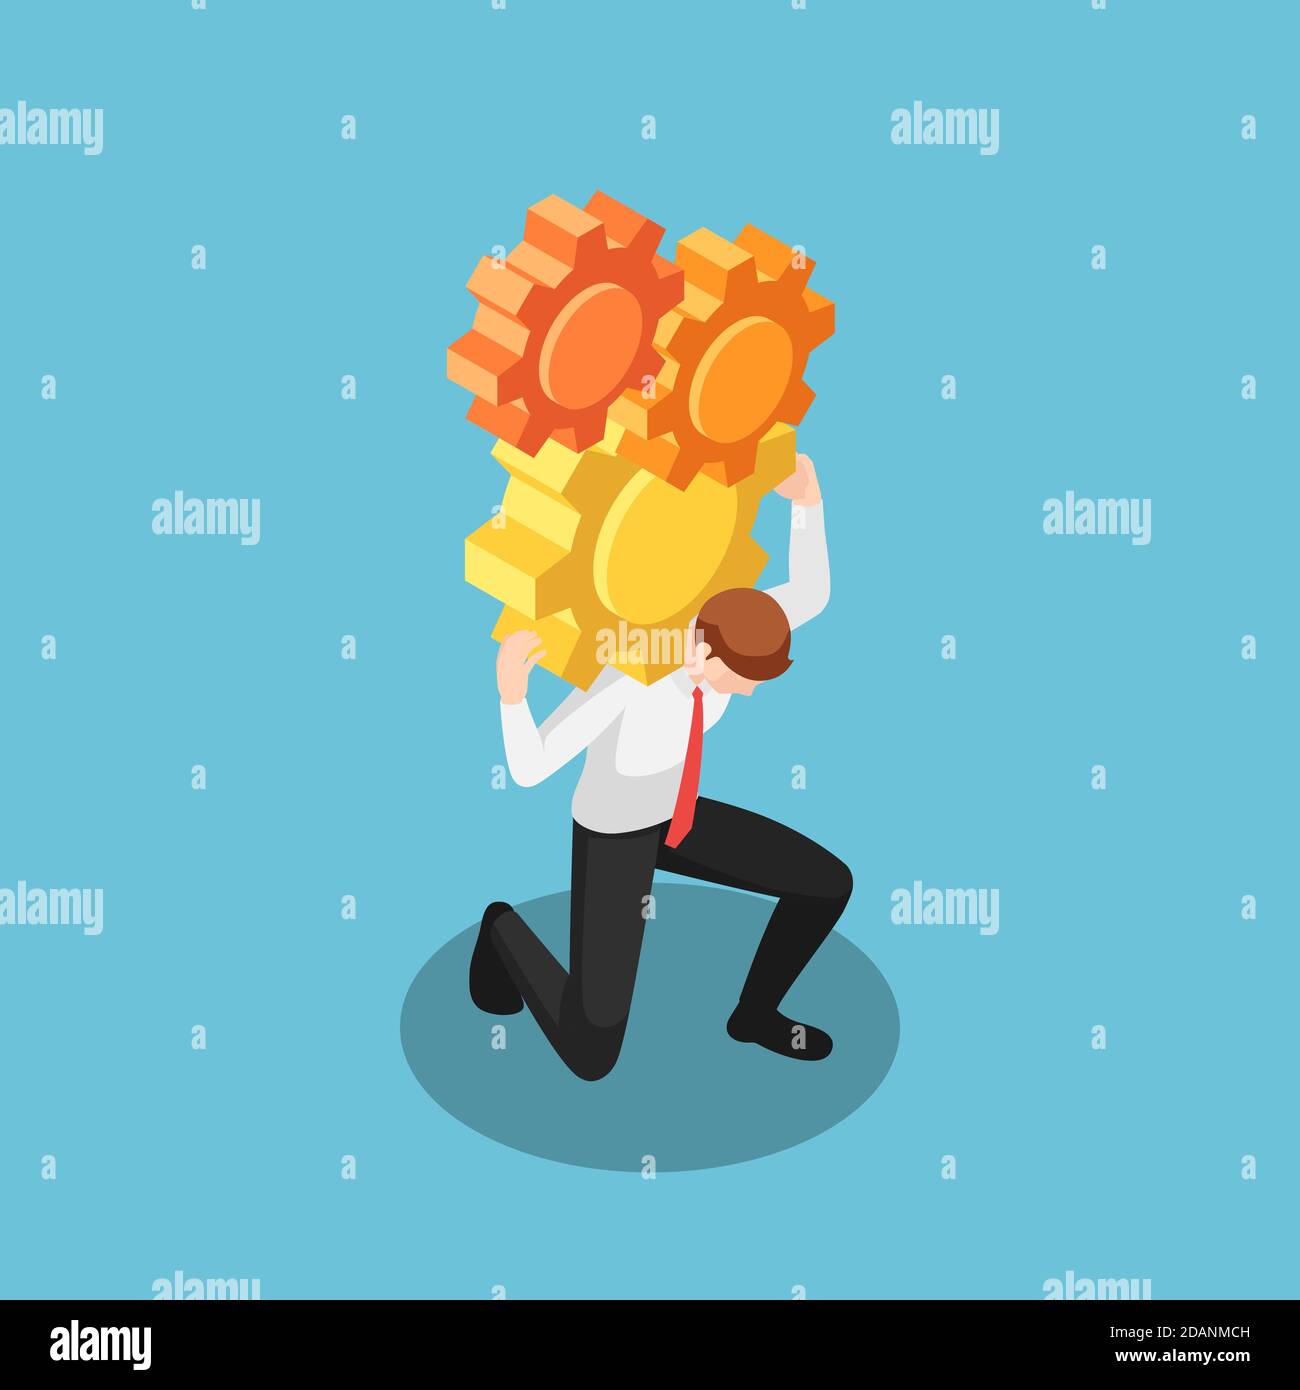 Flat 3d Isometric Businessman Carrying Huge Gears. Business Process and Development Concept. Stock Vector